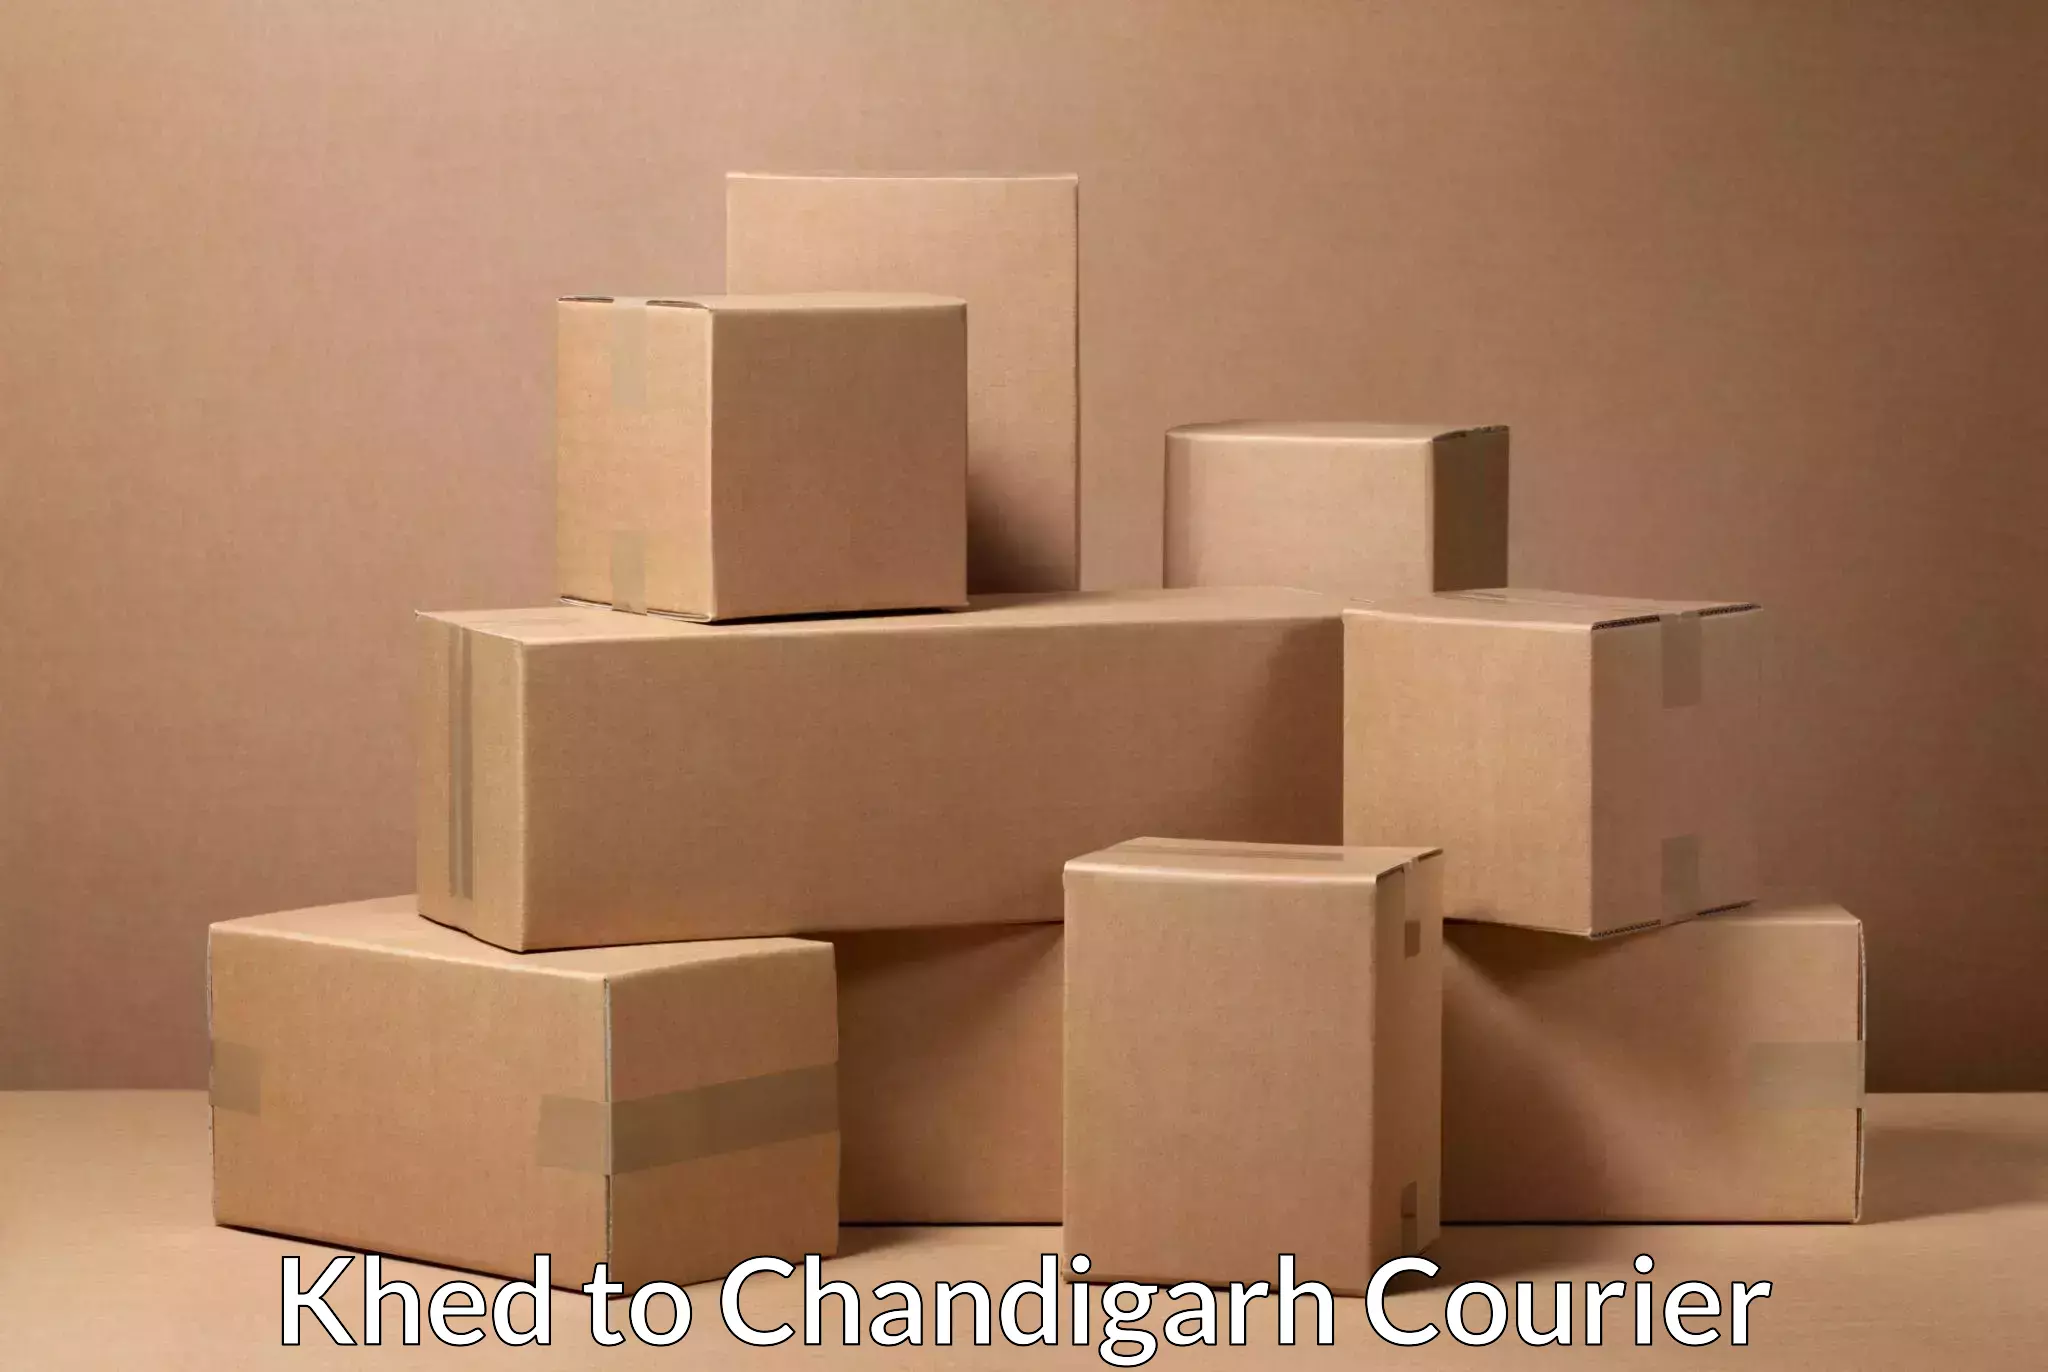 High-capacity shipping options Khed to Chandigarh